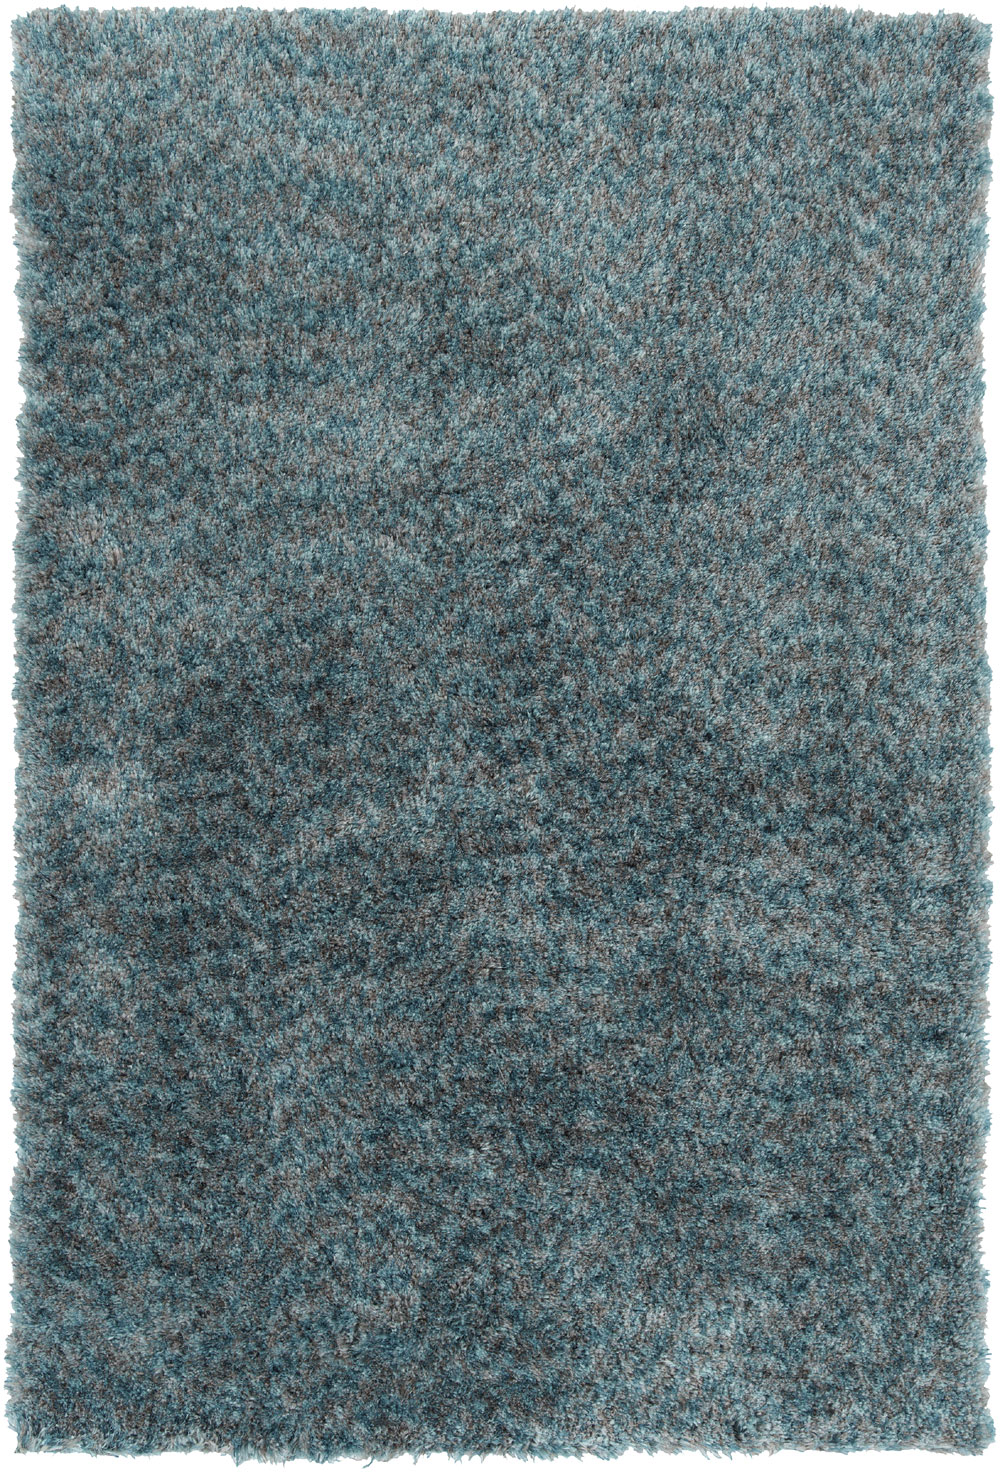 Dalyn Cabot CT1 Teal Rug